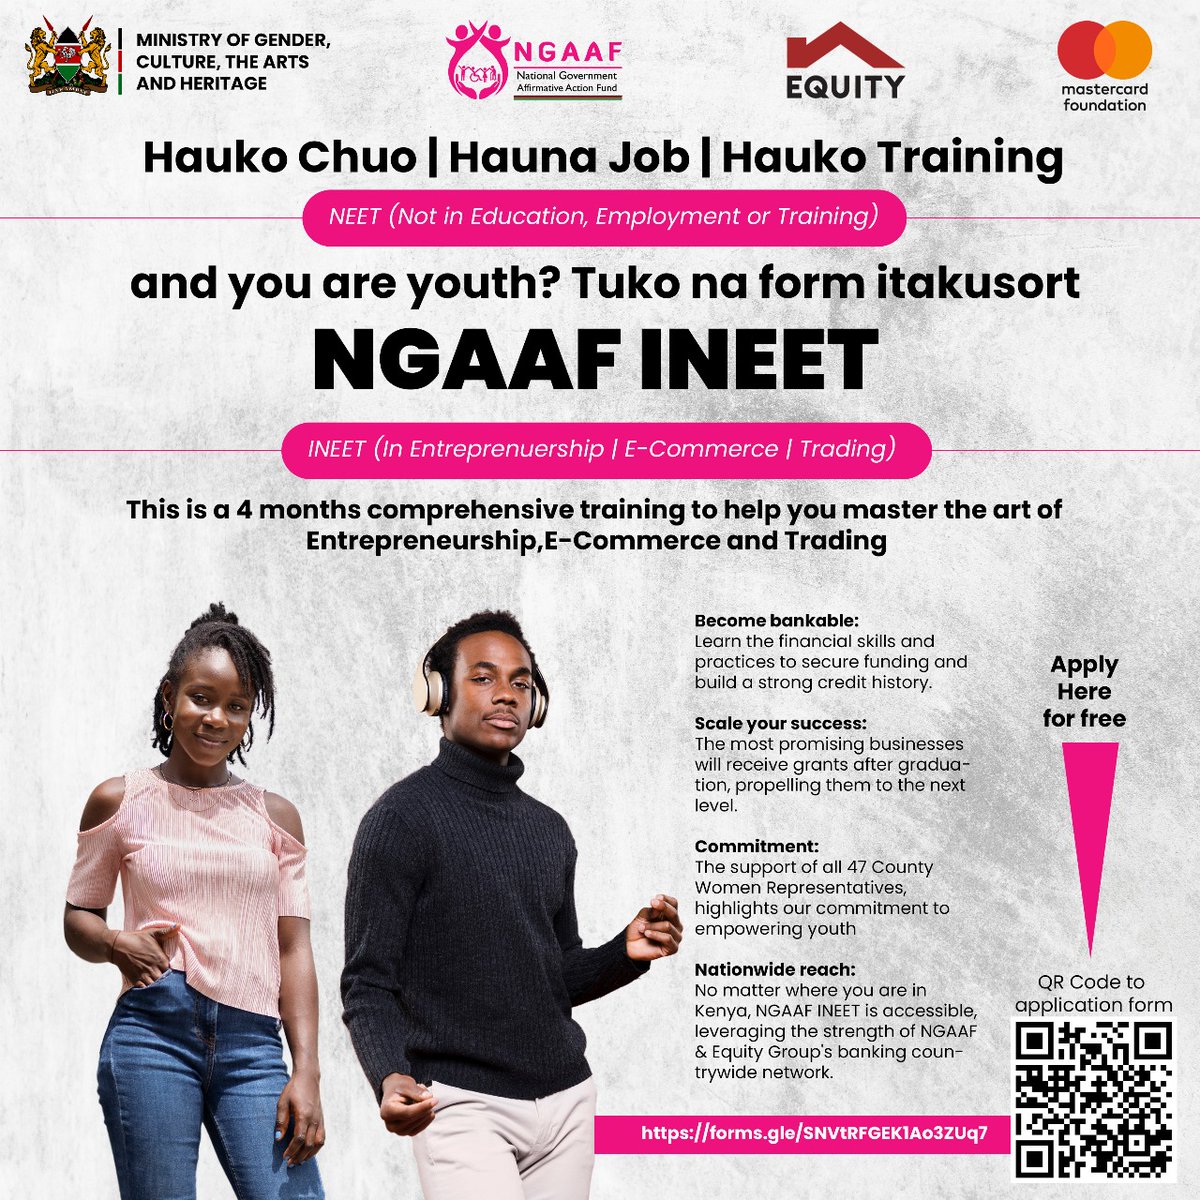 The #NGAAFINEET training program provides an opportunity for young people to acquire skills in Entrepreneurship, Trade and E-commerce! Register for a slot today! forms.gle/TnHKMXKD64ZKjv… @MastercardFdn @KeEquityBank @NYC_YouthVoice @SDY_Ke @NGAAF_KE @UNYouthAffairs